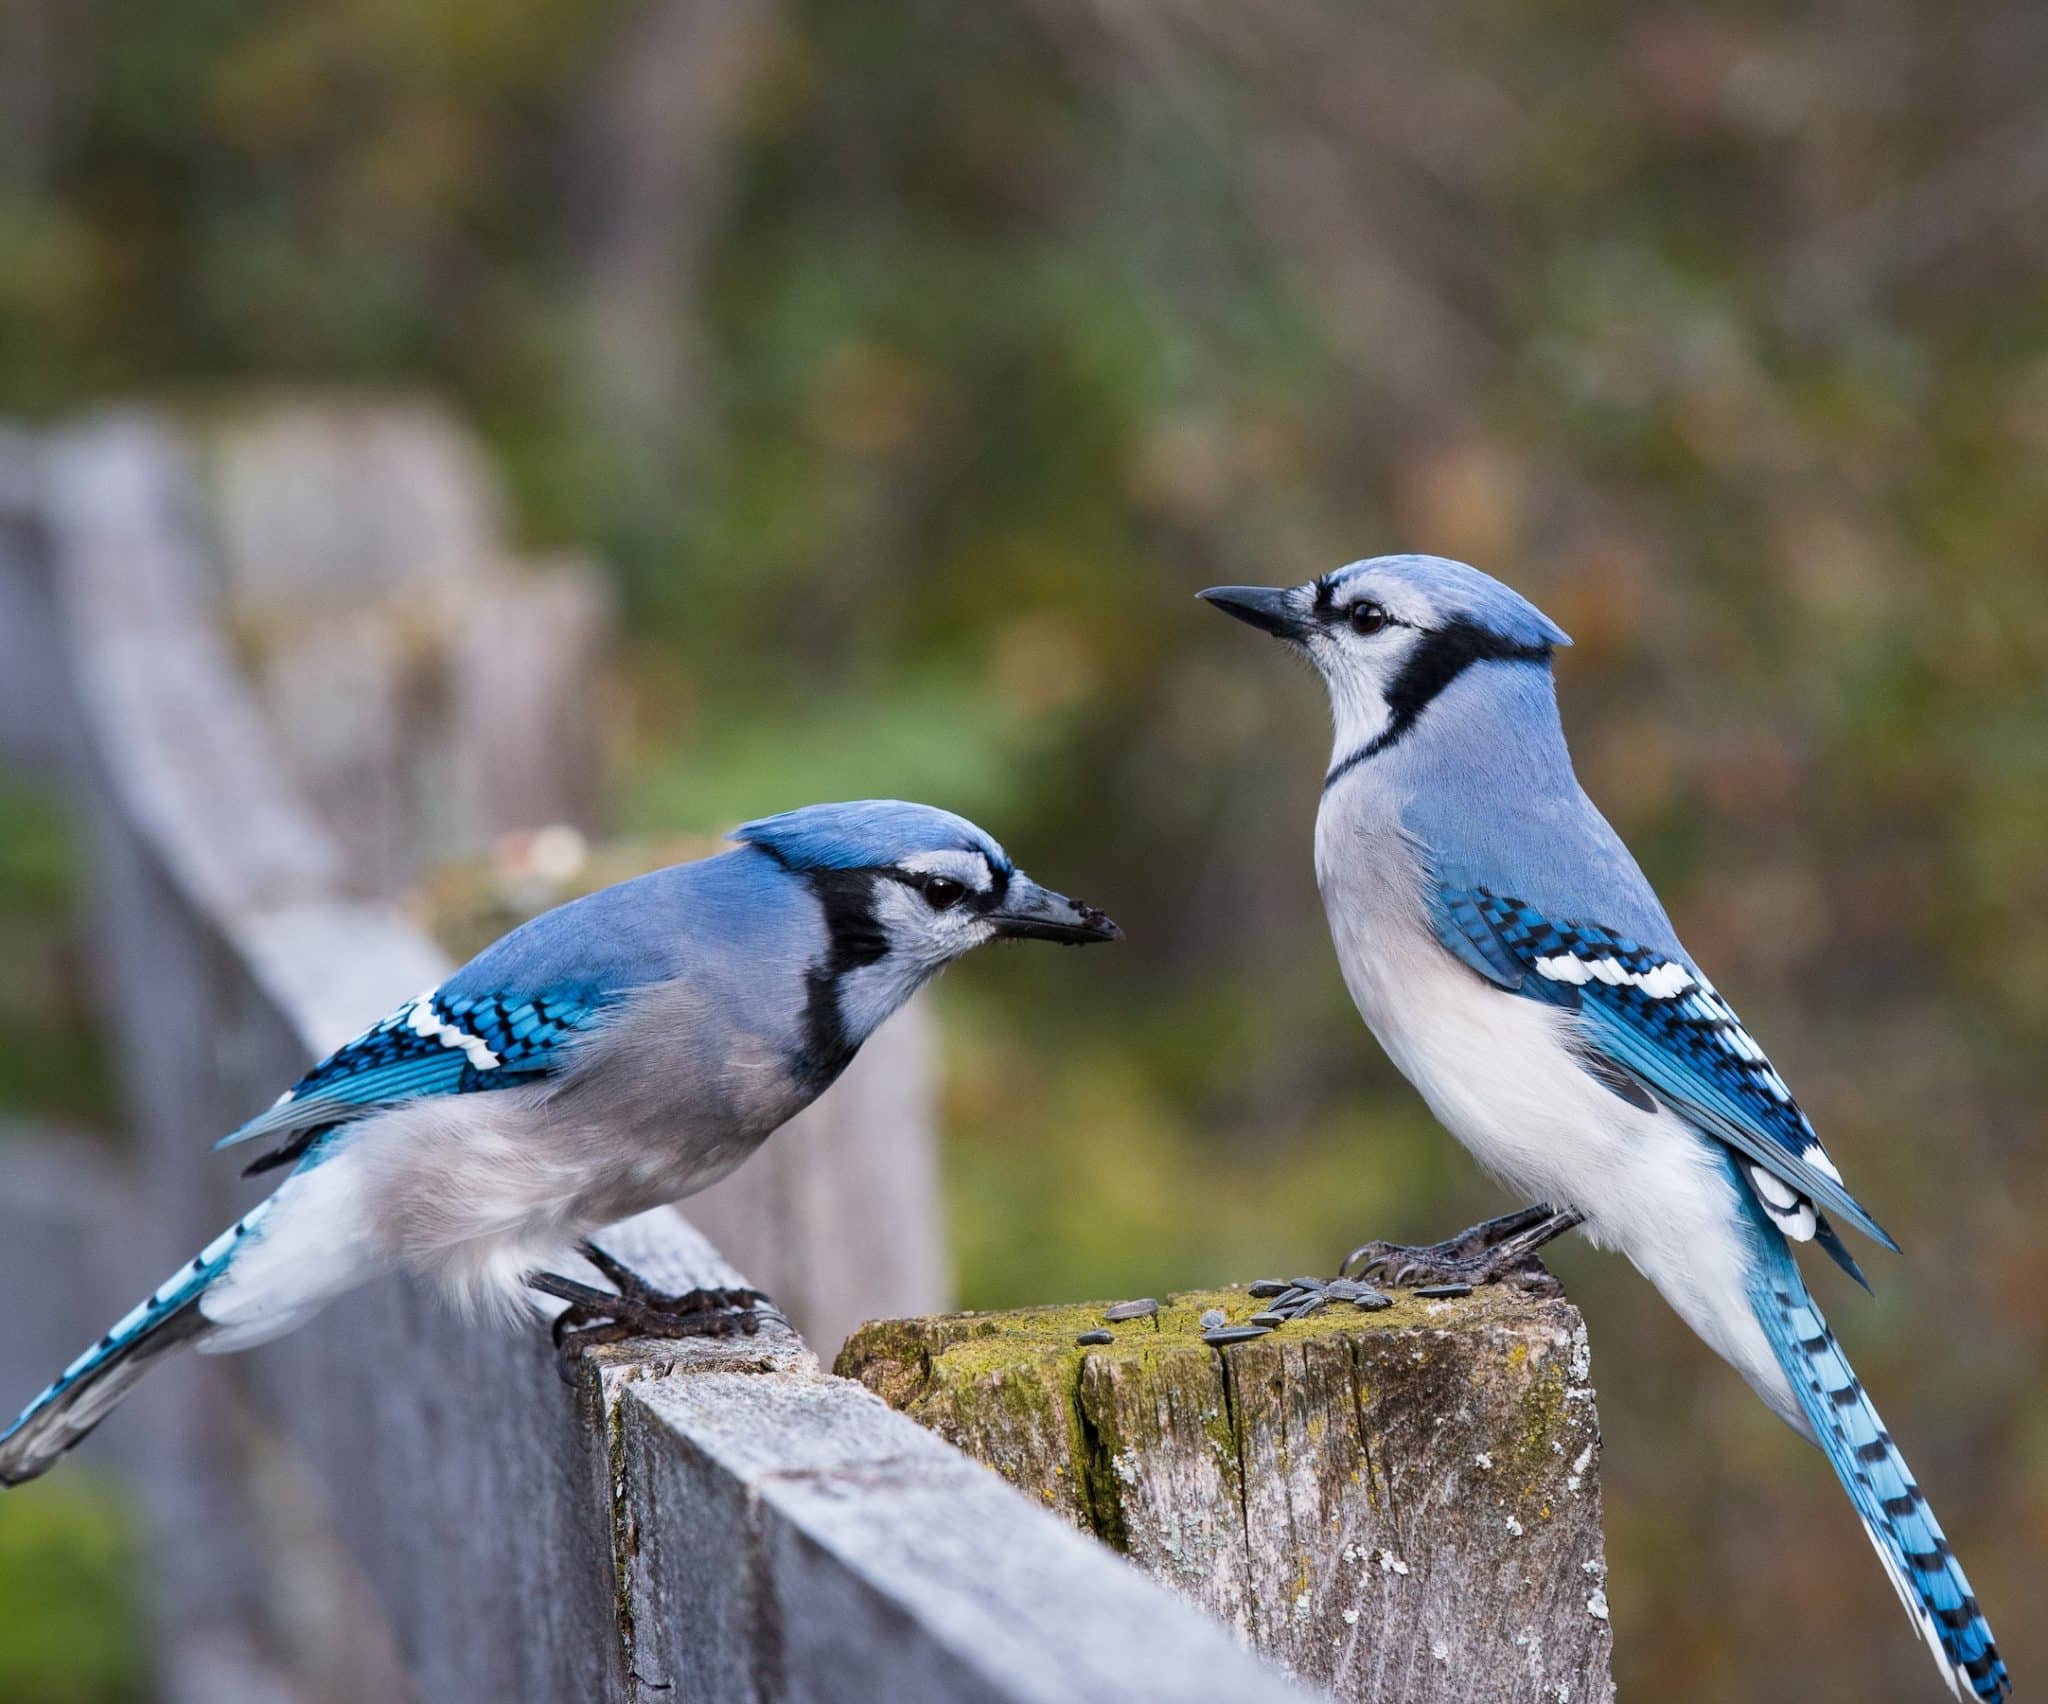 Birds Perched (Two Blue Jays)